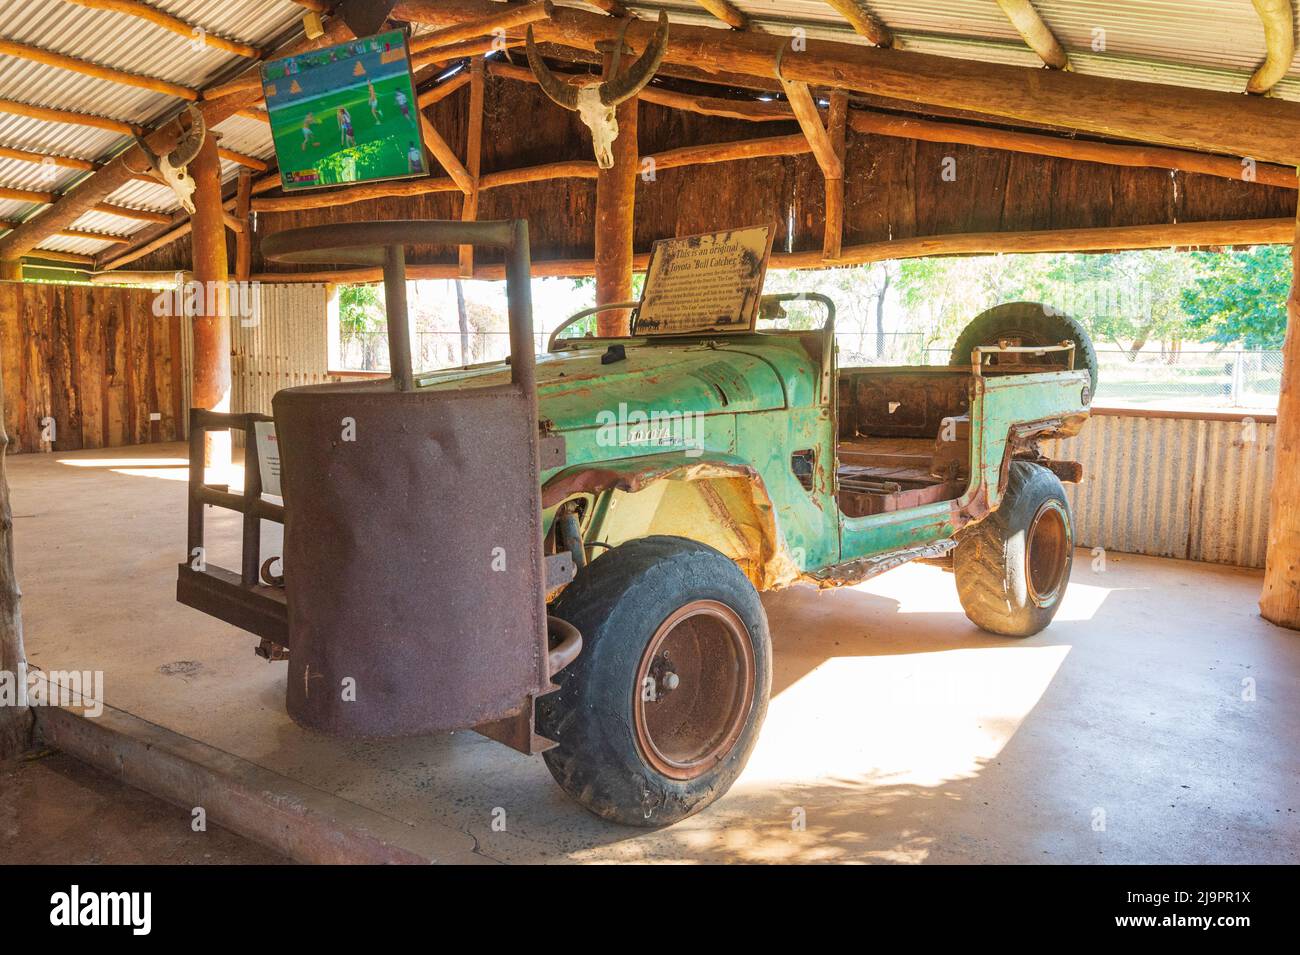 An old Toyota Land Cruiser Bull Catcher used to catch buffalos from the cage in front, Bark Hut Inn, Northern Territory, NT, Australia Stock Photo